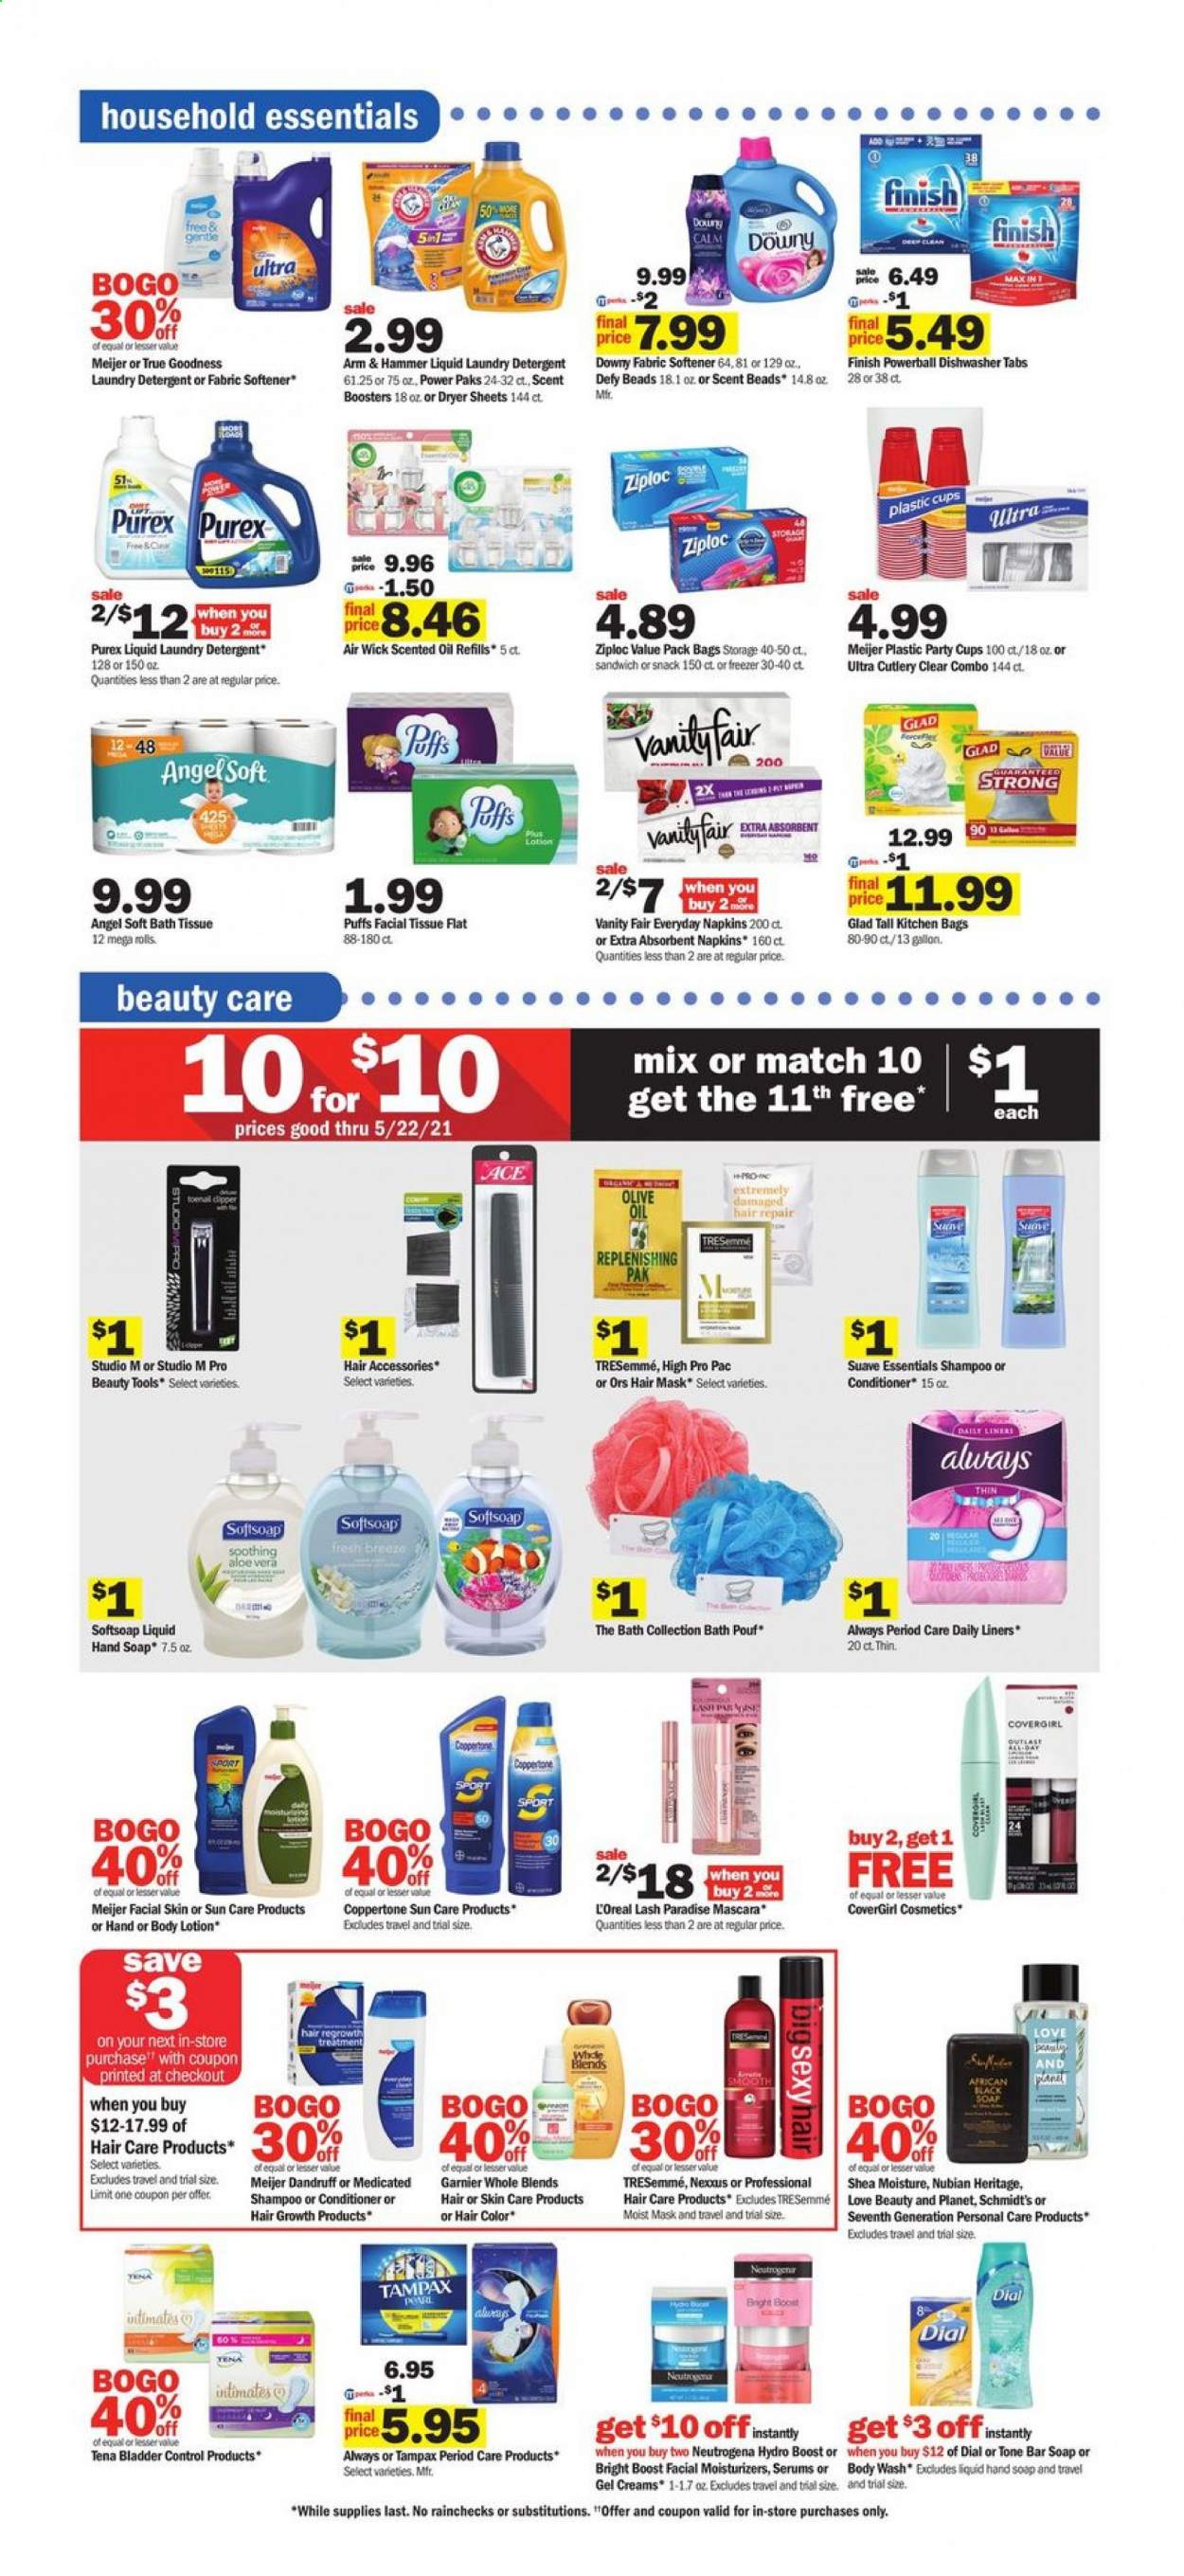 thumbnail - Meijer Flyer - 05/09/2021 - 05/15/2021 - Sales products - puffs, sandwich, ARM & HAMMER, Ace, olive oil, oil, Boost, napkins, bath tissue, detergent, fabric softener, laundry detergent, dryer sheets, scent booster, Purex, Downy Laundry, Finish Powerball, body wash, shampoo, Softsoap, Suave, hand soap, soap bar, Dial, soap, Tampax, Garnier, L’Oréal, moisturizer, Neutrogena, conditioner, TRESemmé, hair color, Nexxus, hair mask, mascara, Ziploc, cup, Air Wick, scented oil, bag. Page 13.